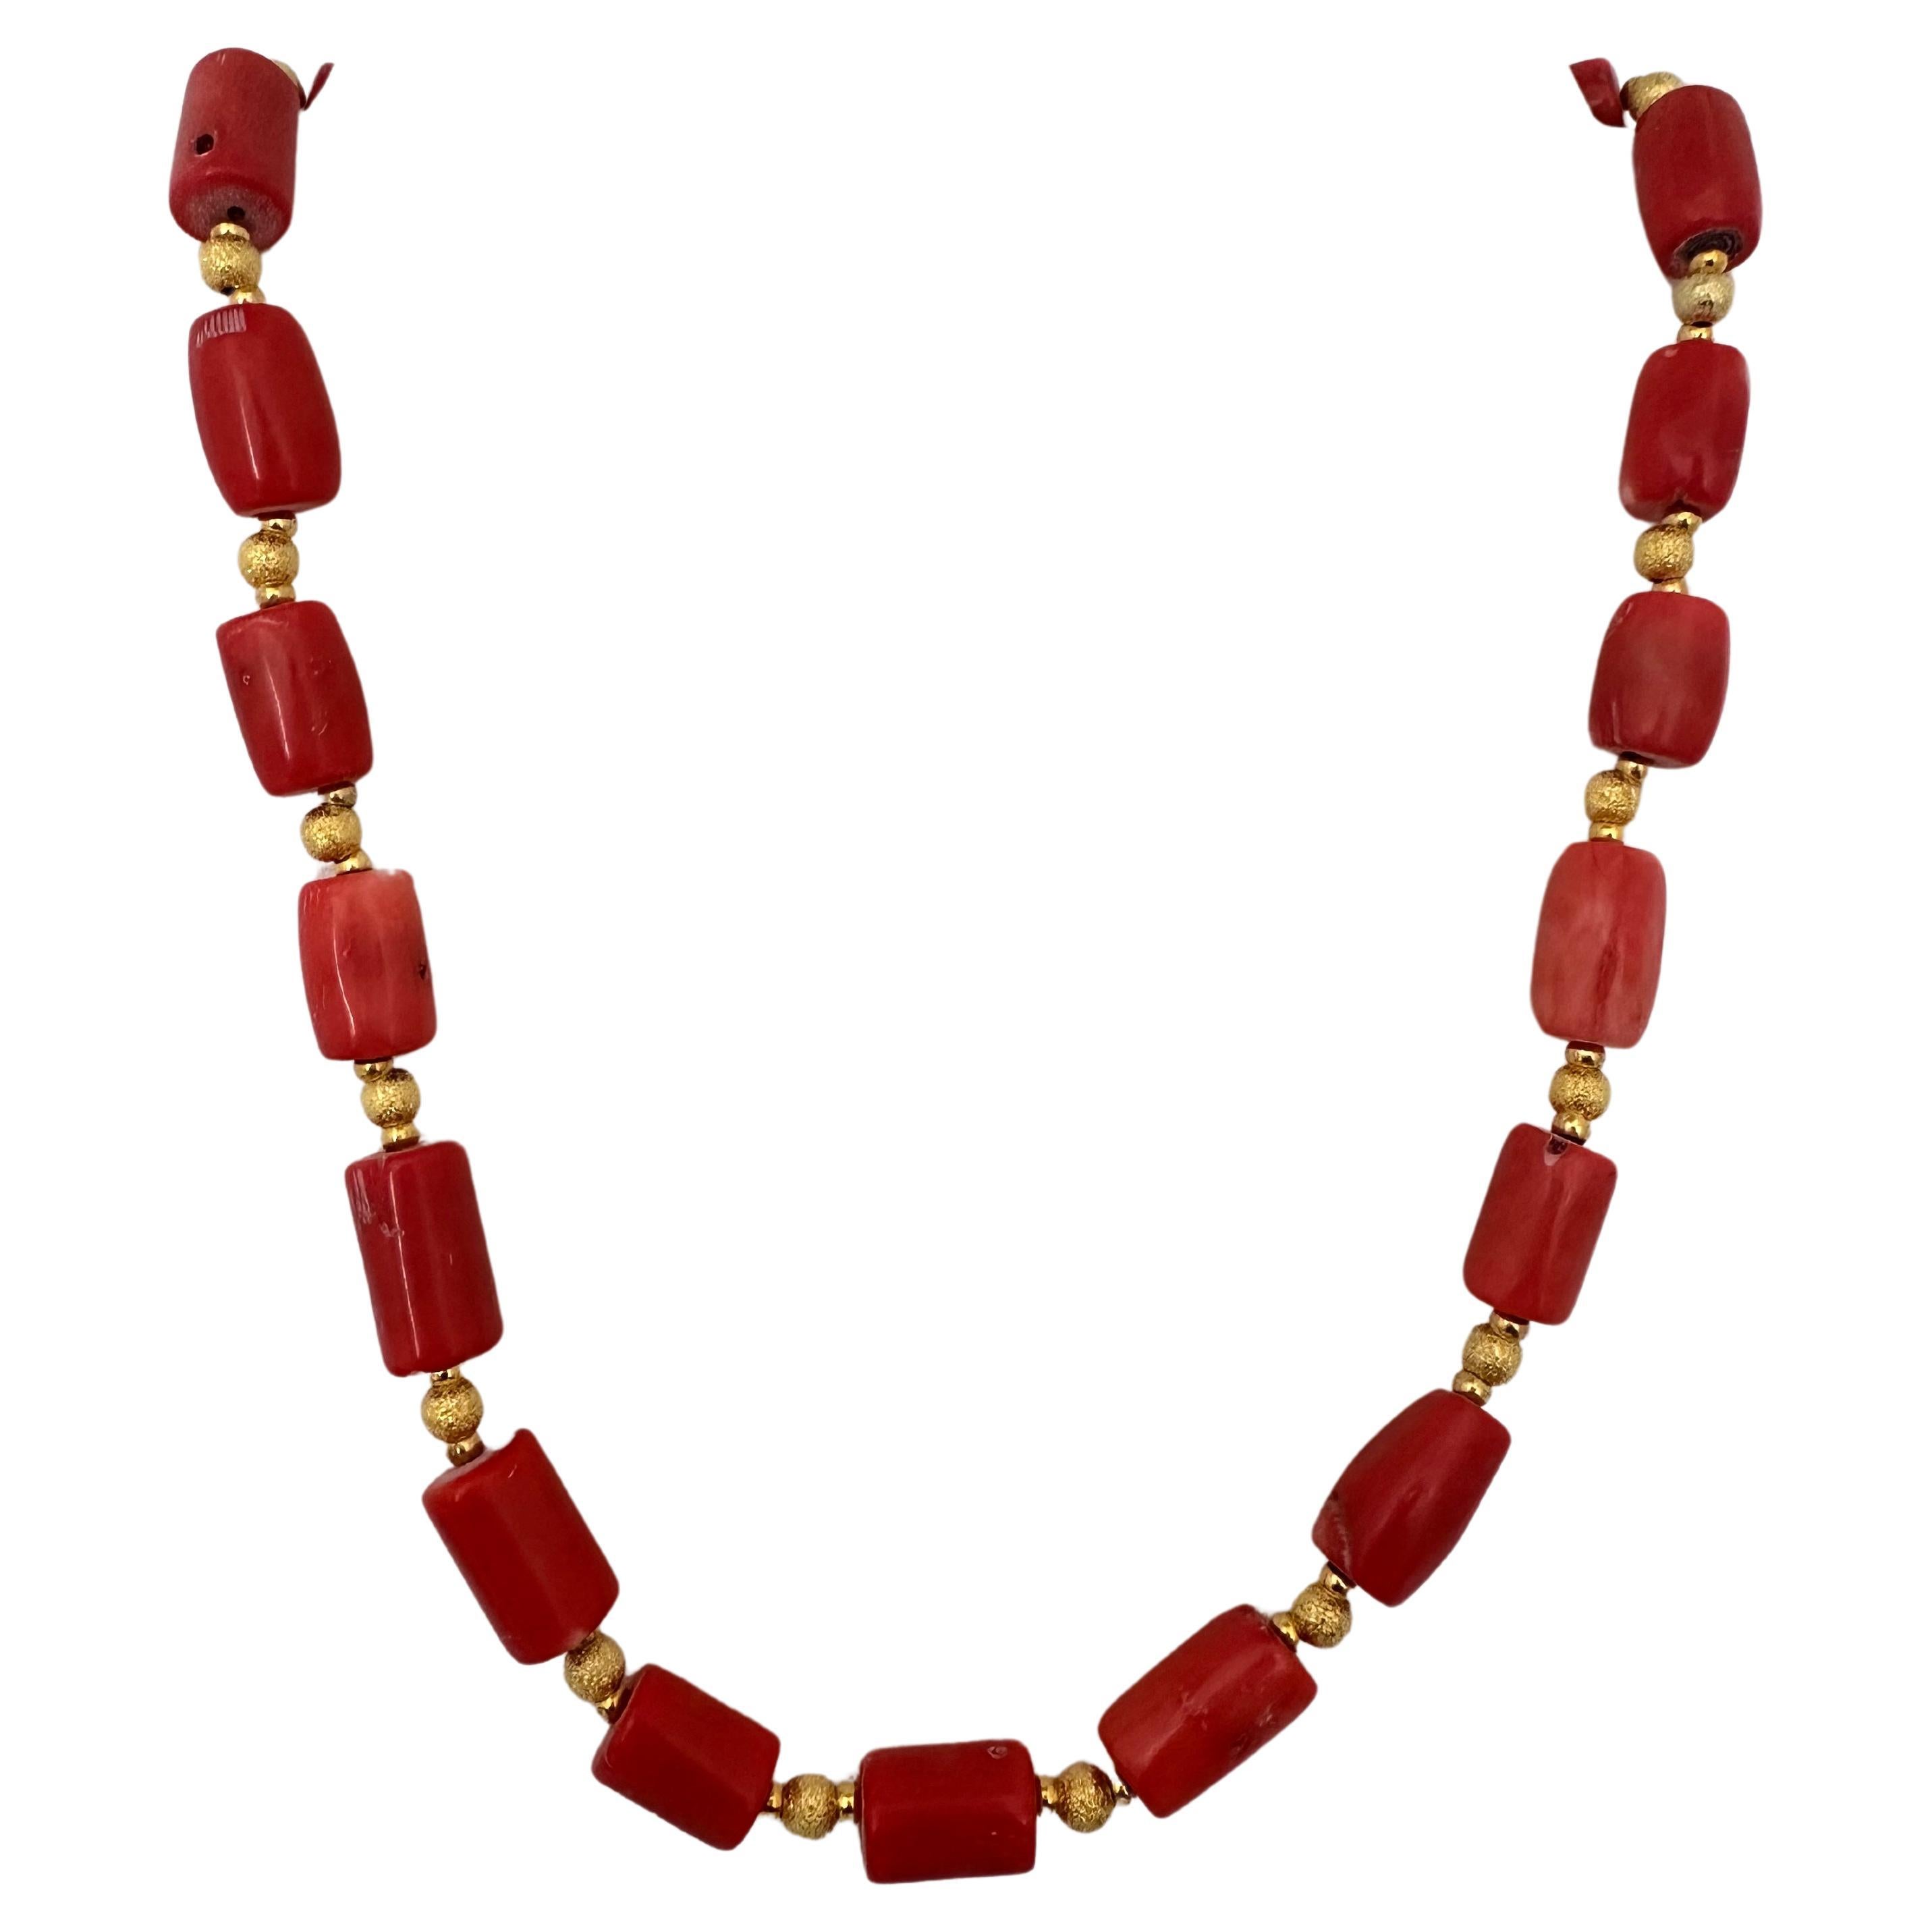 Handmade ~ Gold Beads & Salmon Barrel Shape Coral Beaded 24" Toggle Necklace C48 For Sale